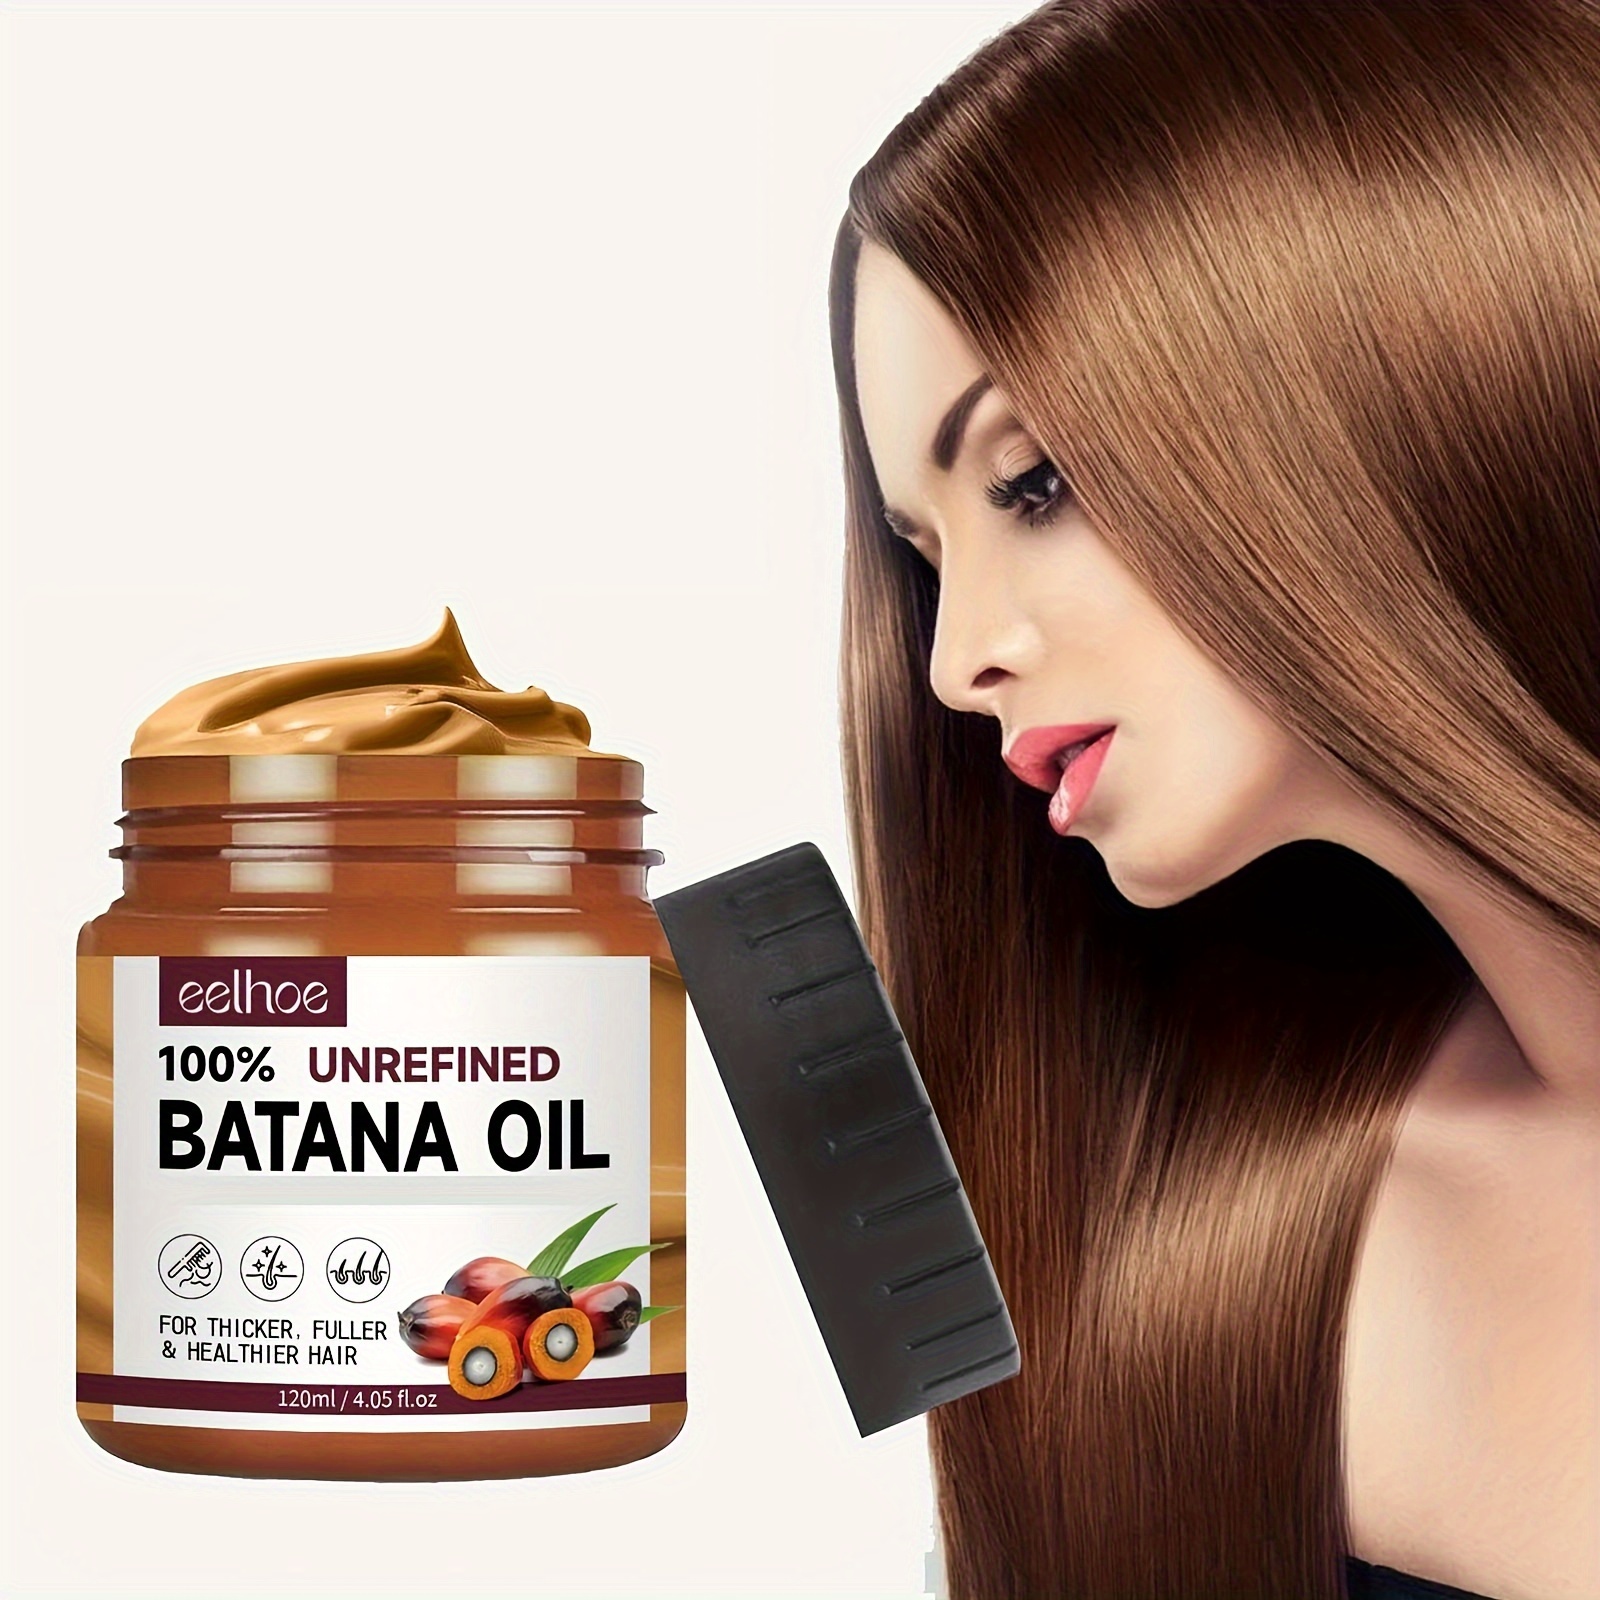 

Batana Oil Hair Mask For Normal Hair — 120ml Deep Conditioner Treatment With 100% Unrefined Oil — Moisturizing, Strengthens And Restores Hair Health